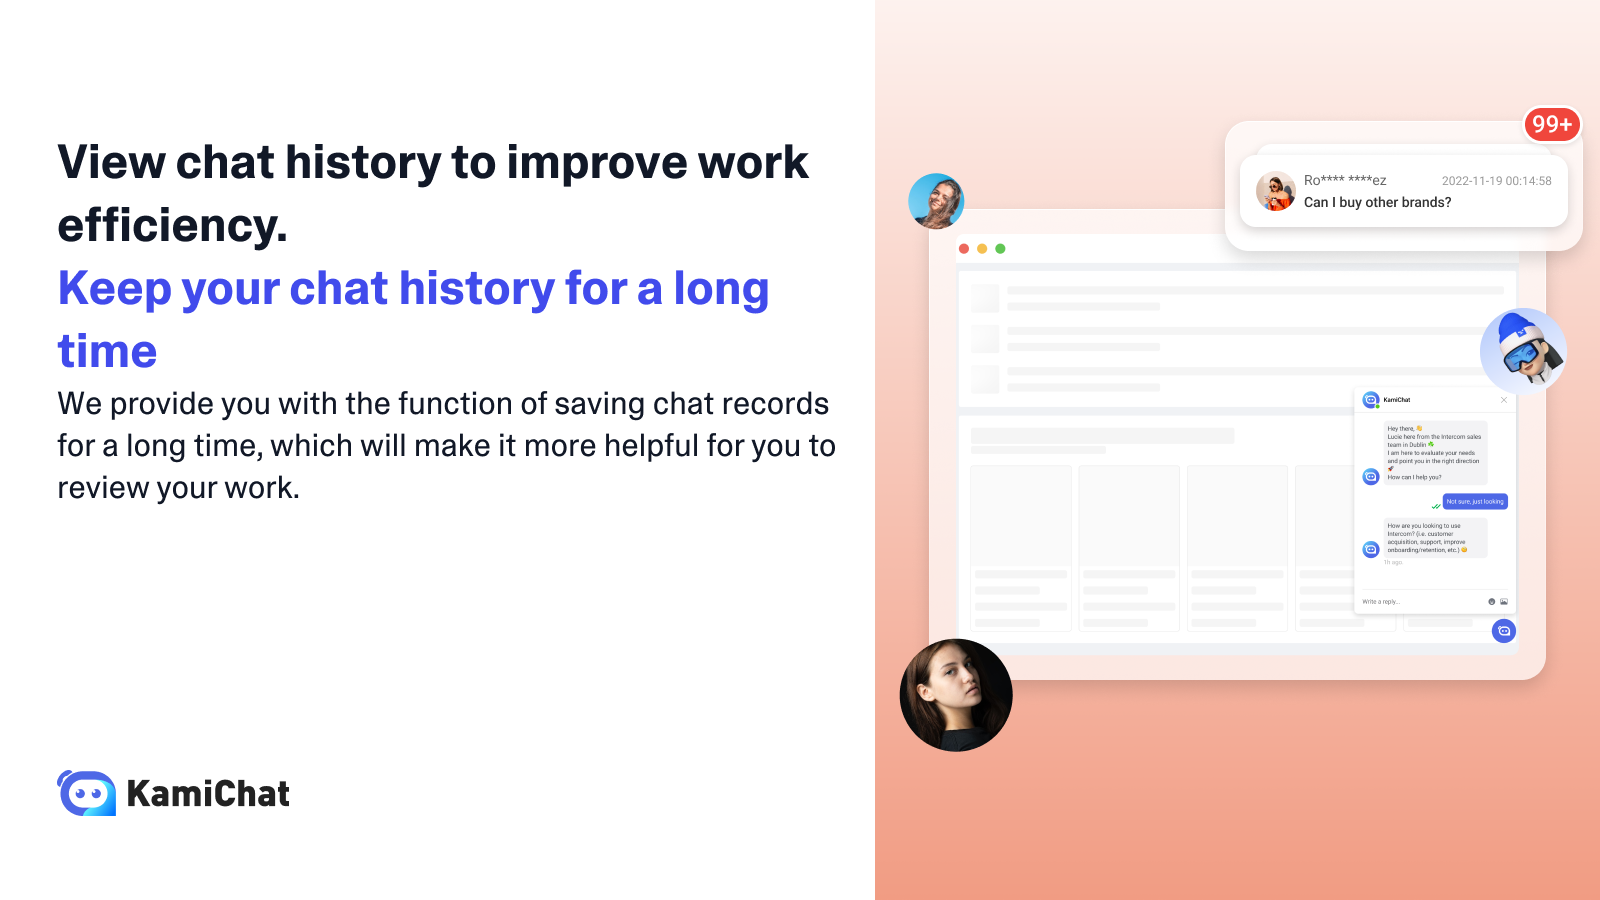 View chat history to improve work efficiency